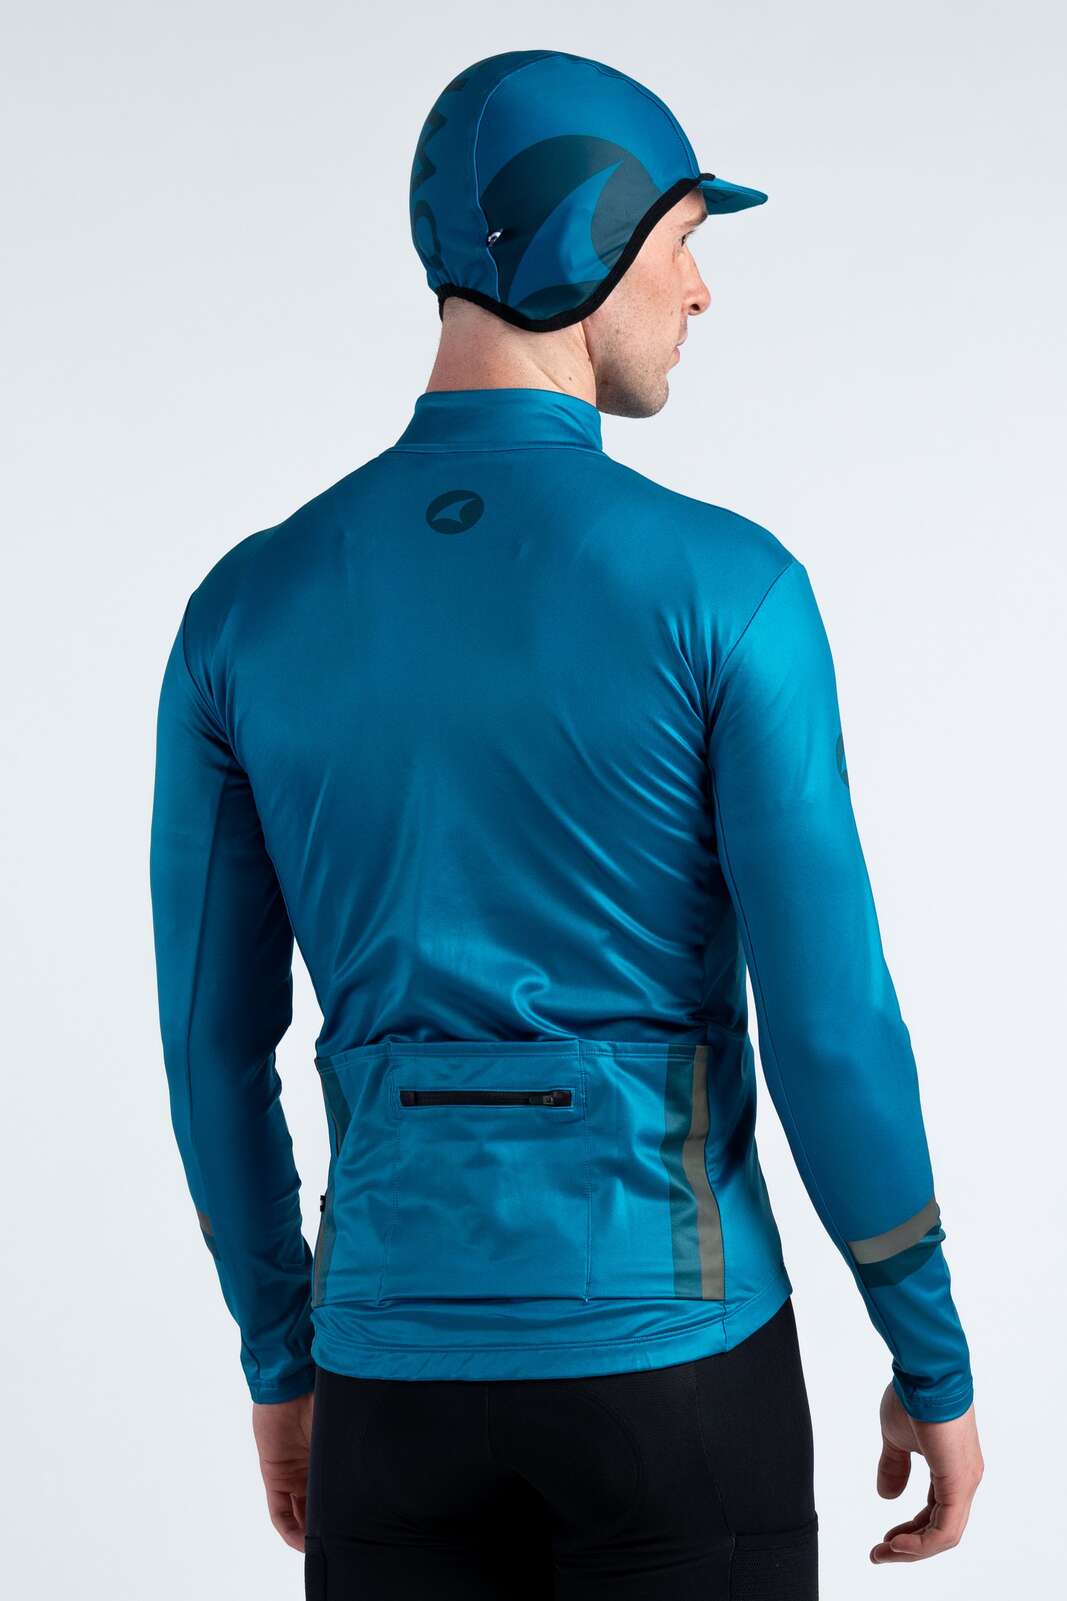 Teal Winter Cycling Cap - Alpine Thermal - Back View